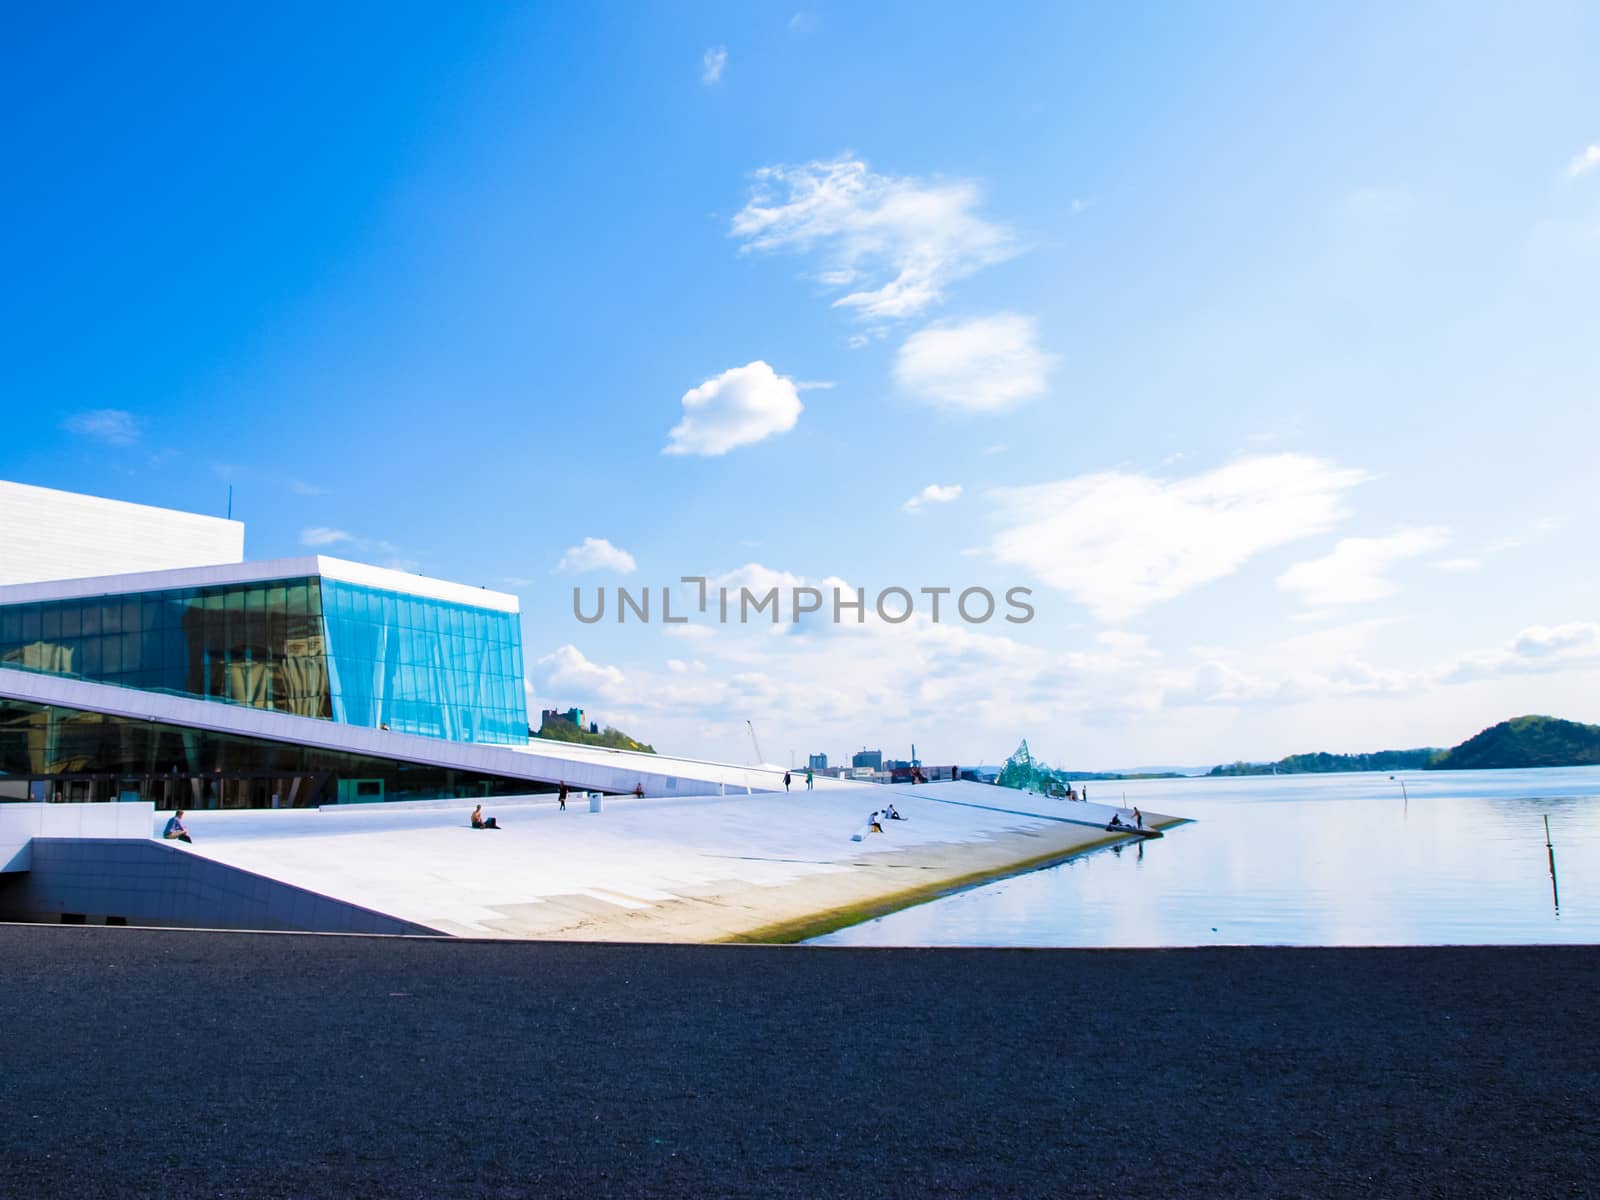 Opera house in Oslo Norway, white building towards fresh blue sky at harbor